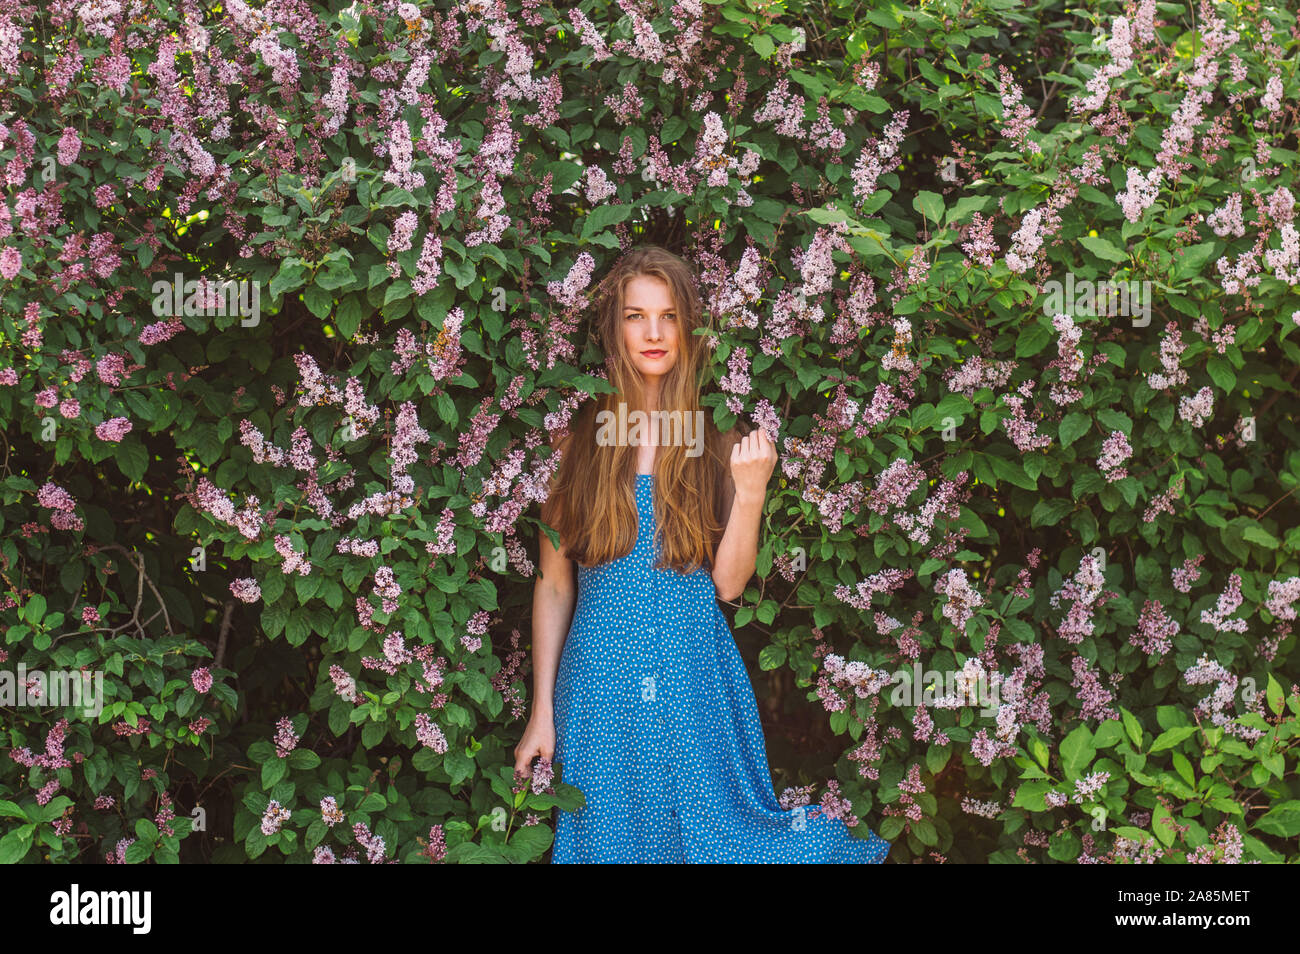 Portrait of girl with blond hair and blue dress among lilac, summertime Stock Photo